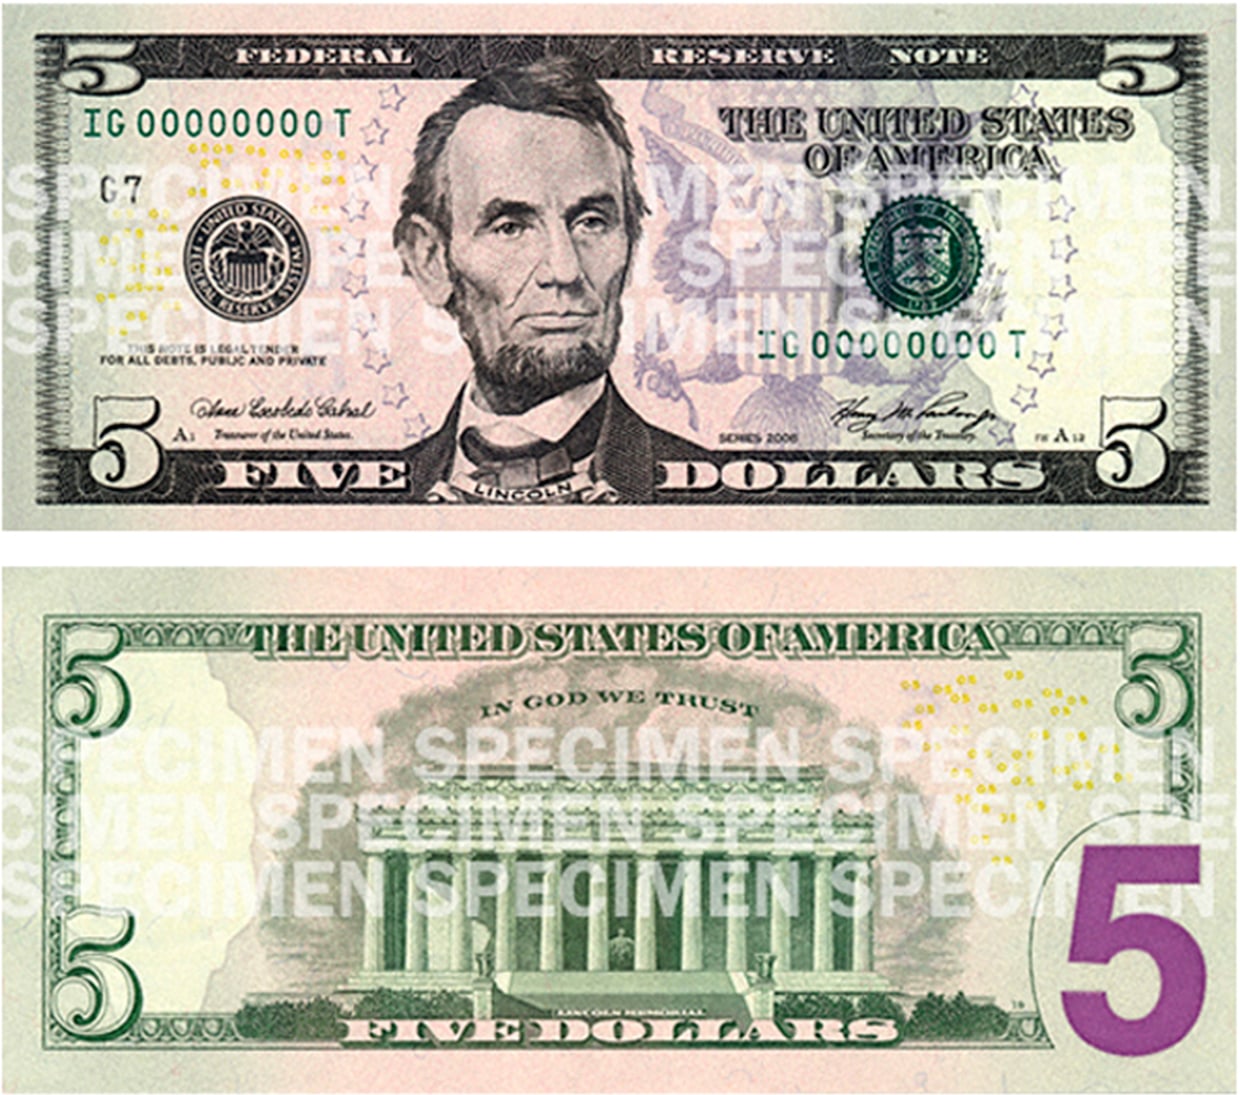 New, colorful $5 bill to debut this week